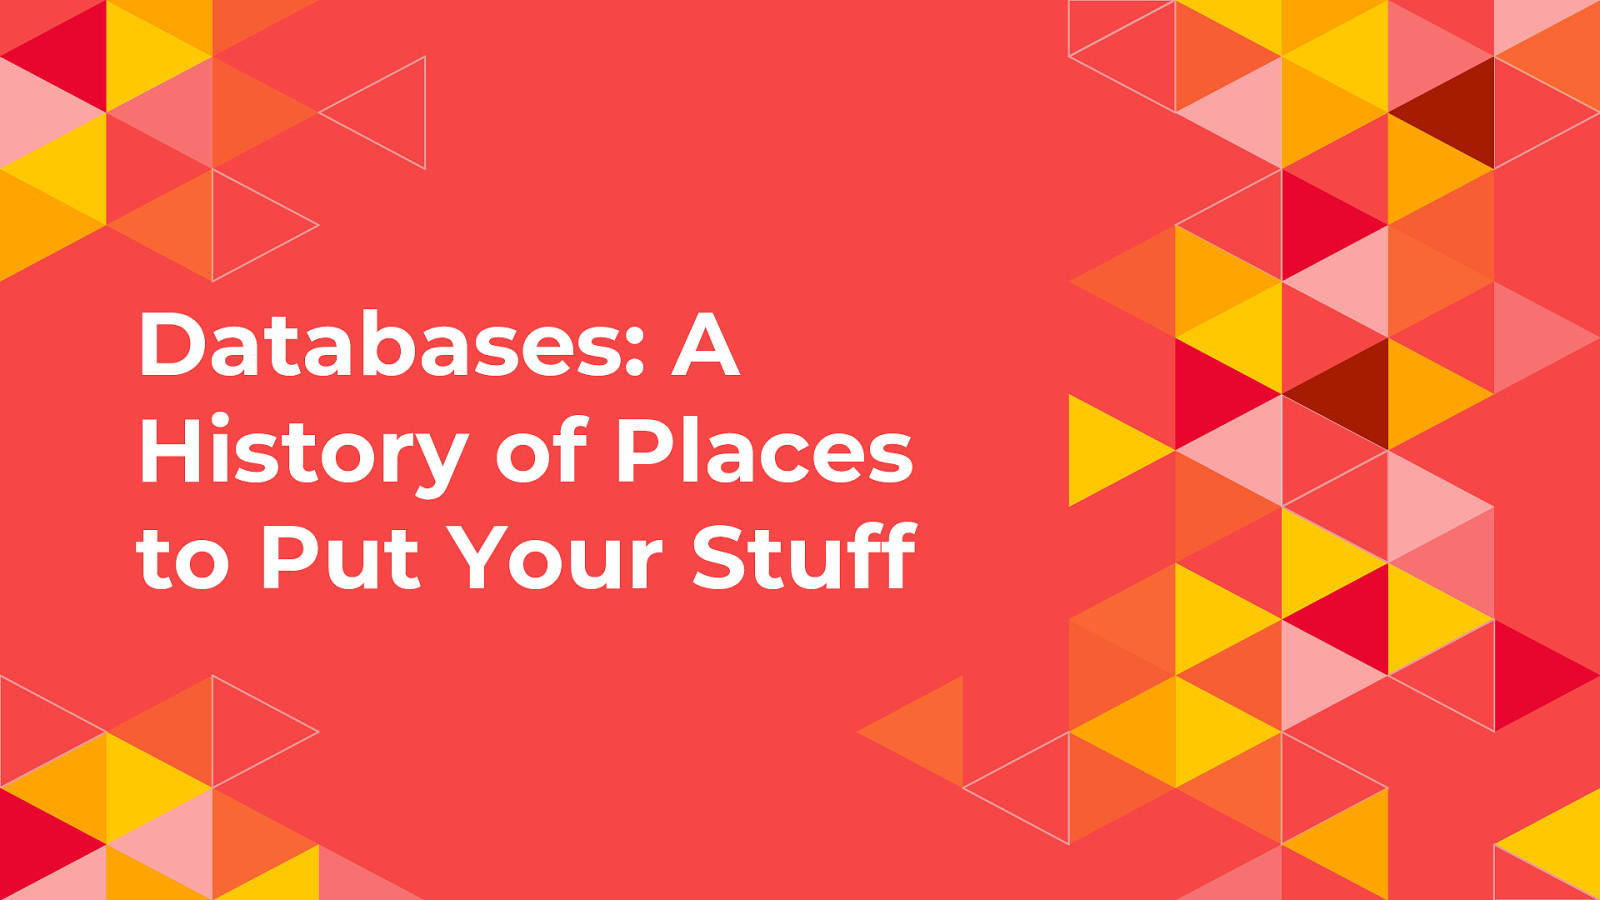 Databases: A History of Places to Put Your Stuff